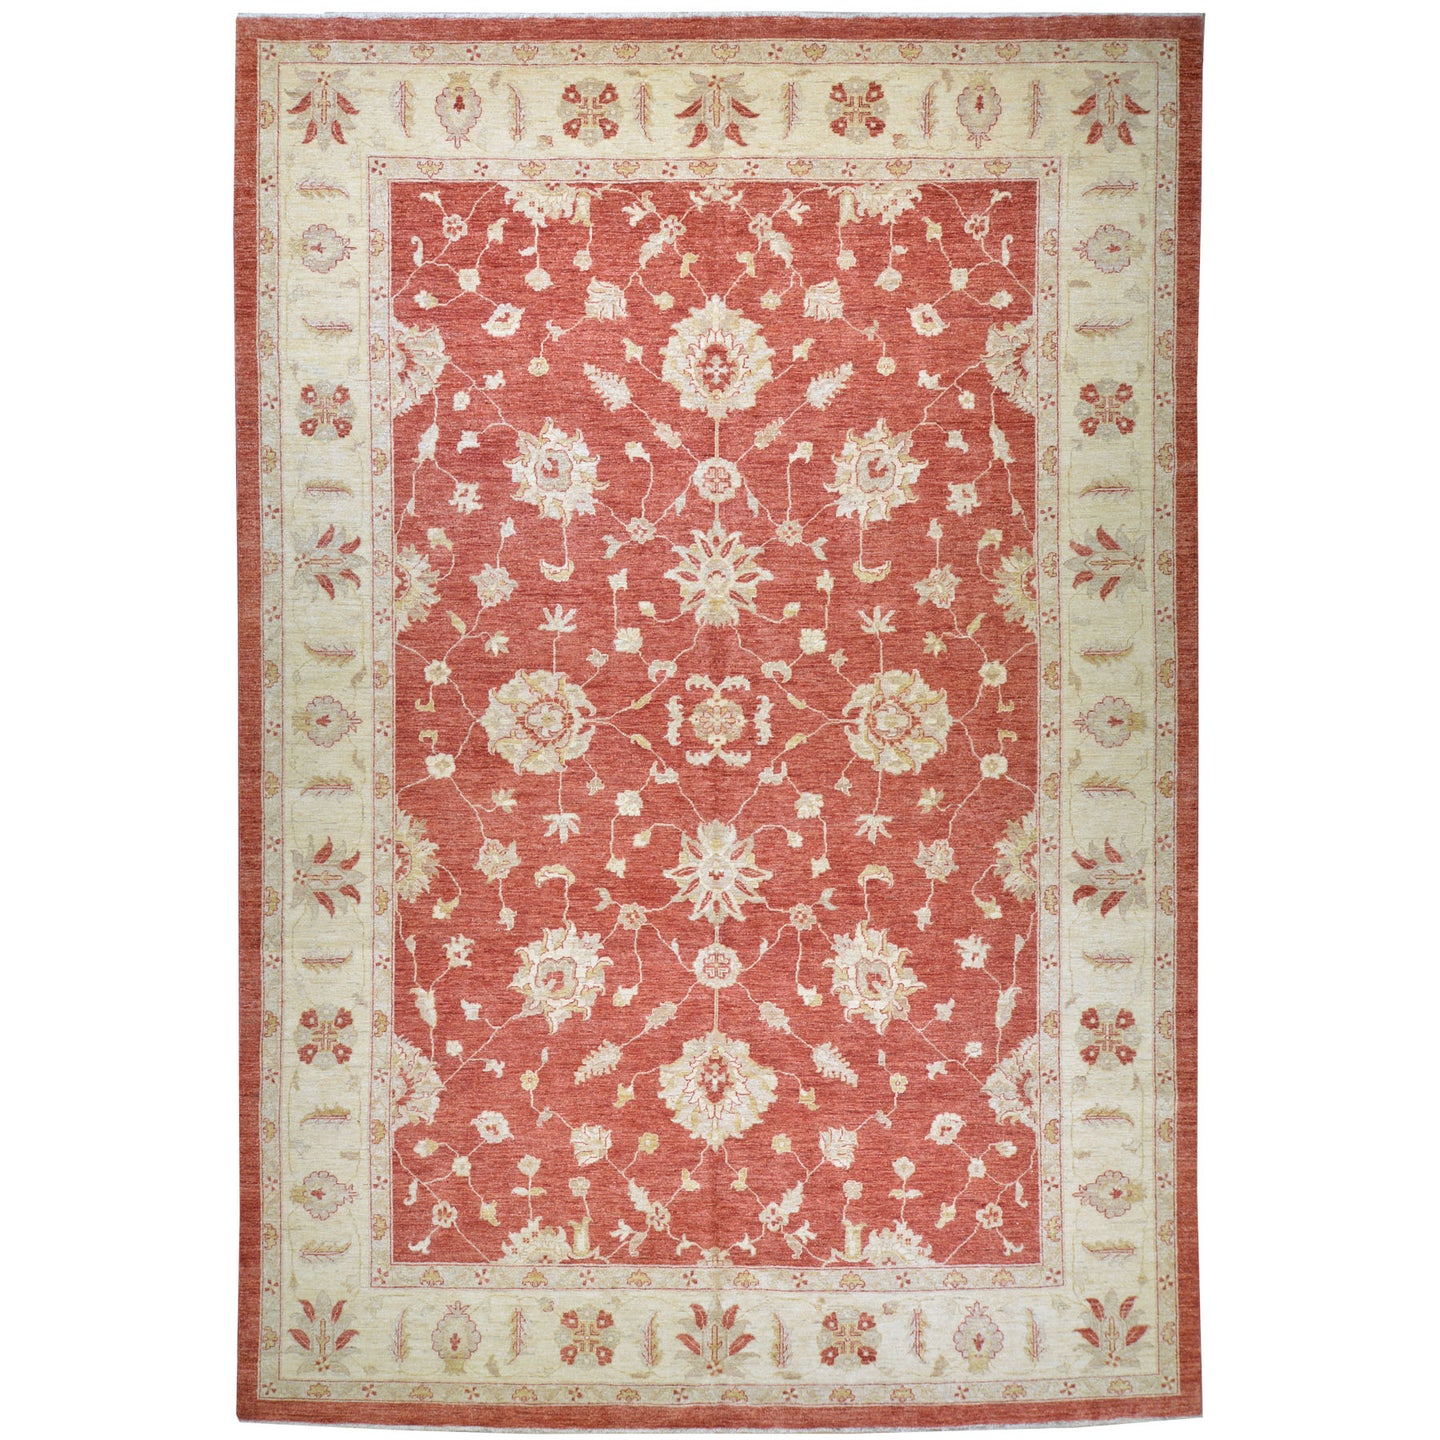 Oriental rugs, hand-knotted carpets, sustainable rugs, classic world oriental rugs, handmade, United States, interior design,  Cwral-7296